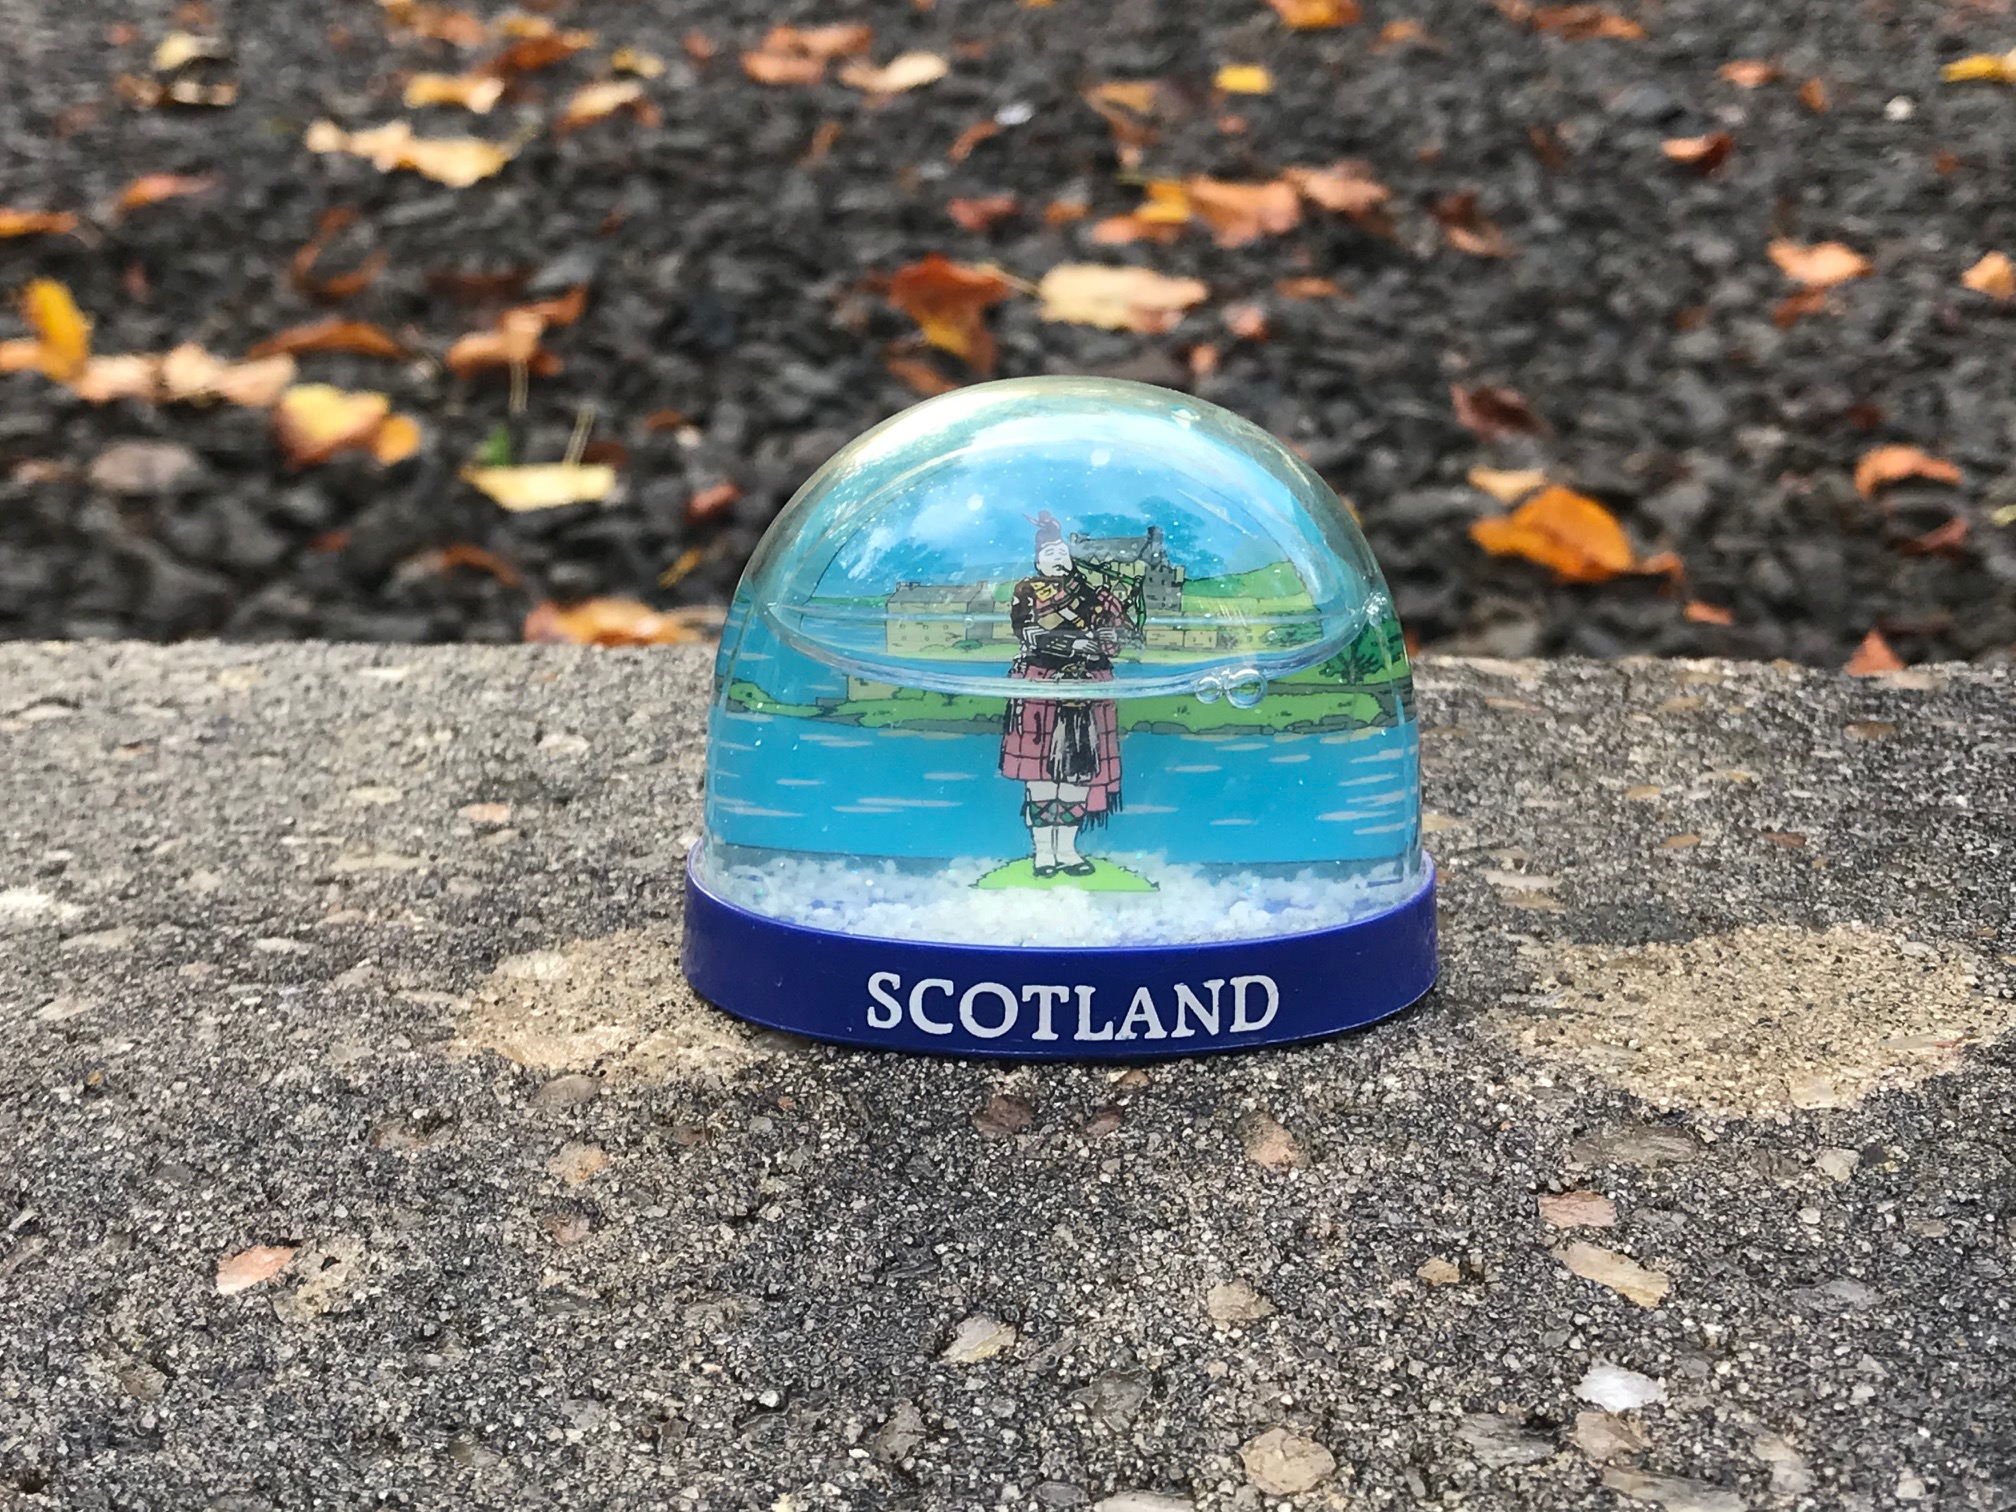 Scotland Snow Globe from a Collection of Snow Globes